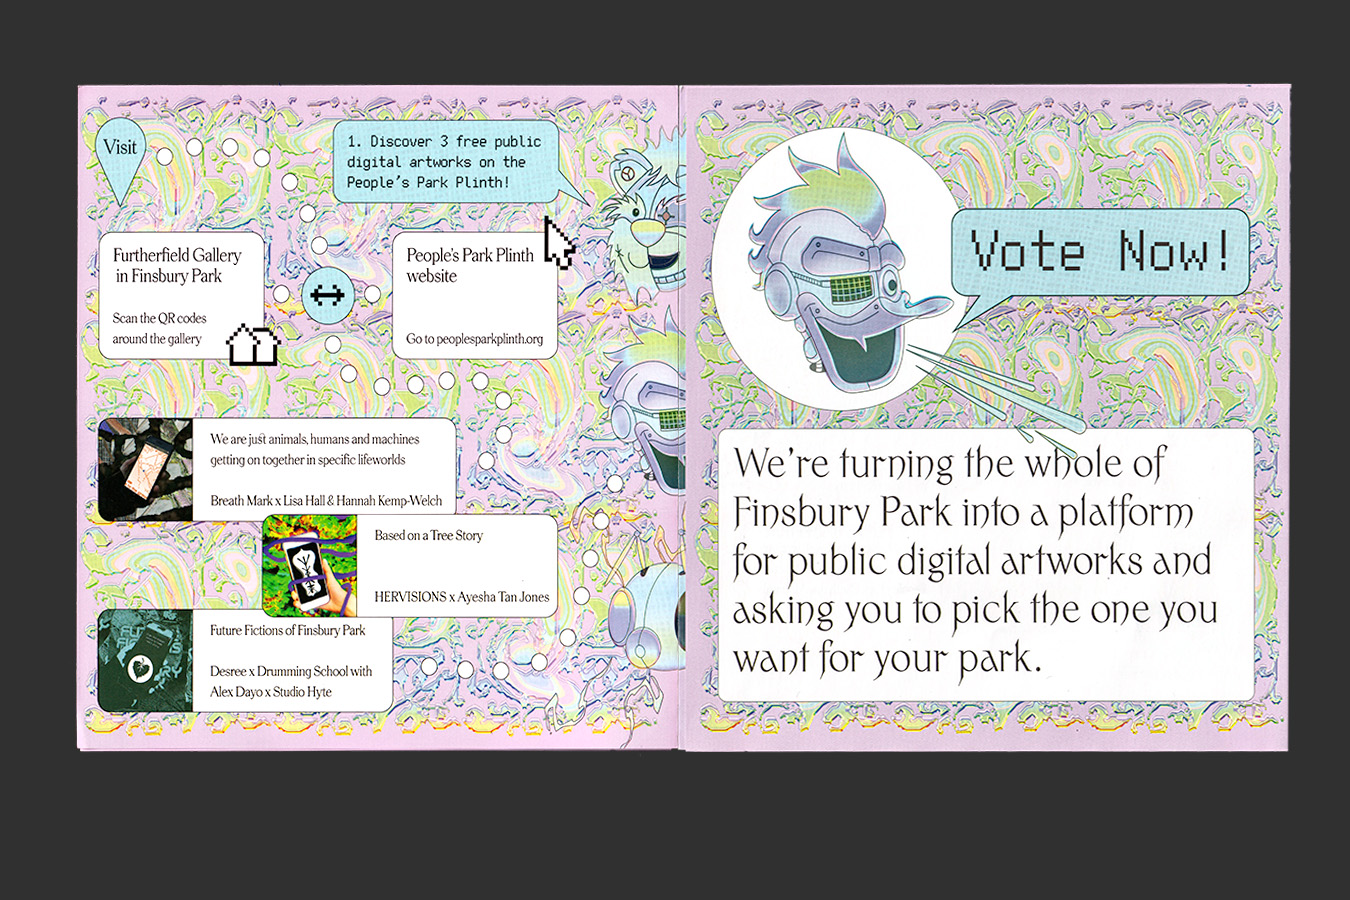 A scan of the People's Park Plinth booklet, the left page has infomation and images of the three projects in the PPP. The right page has a illustration of a cyber duck with a speak bubble saying "vote now" and a paragraph of text underneath. The back cover (right) shows infomation about the project, a map of the park and a cyber teddy bear.